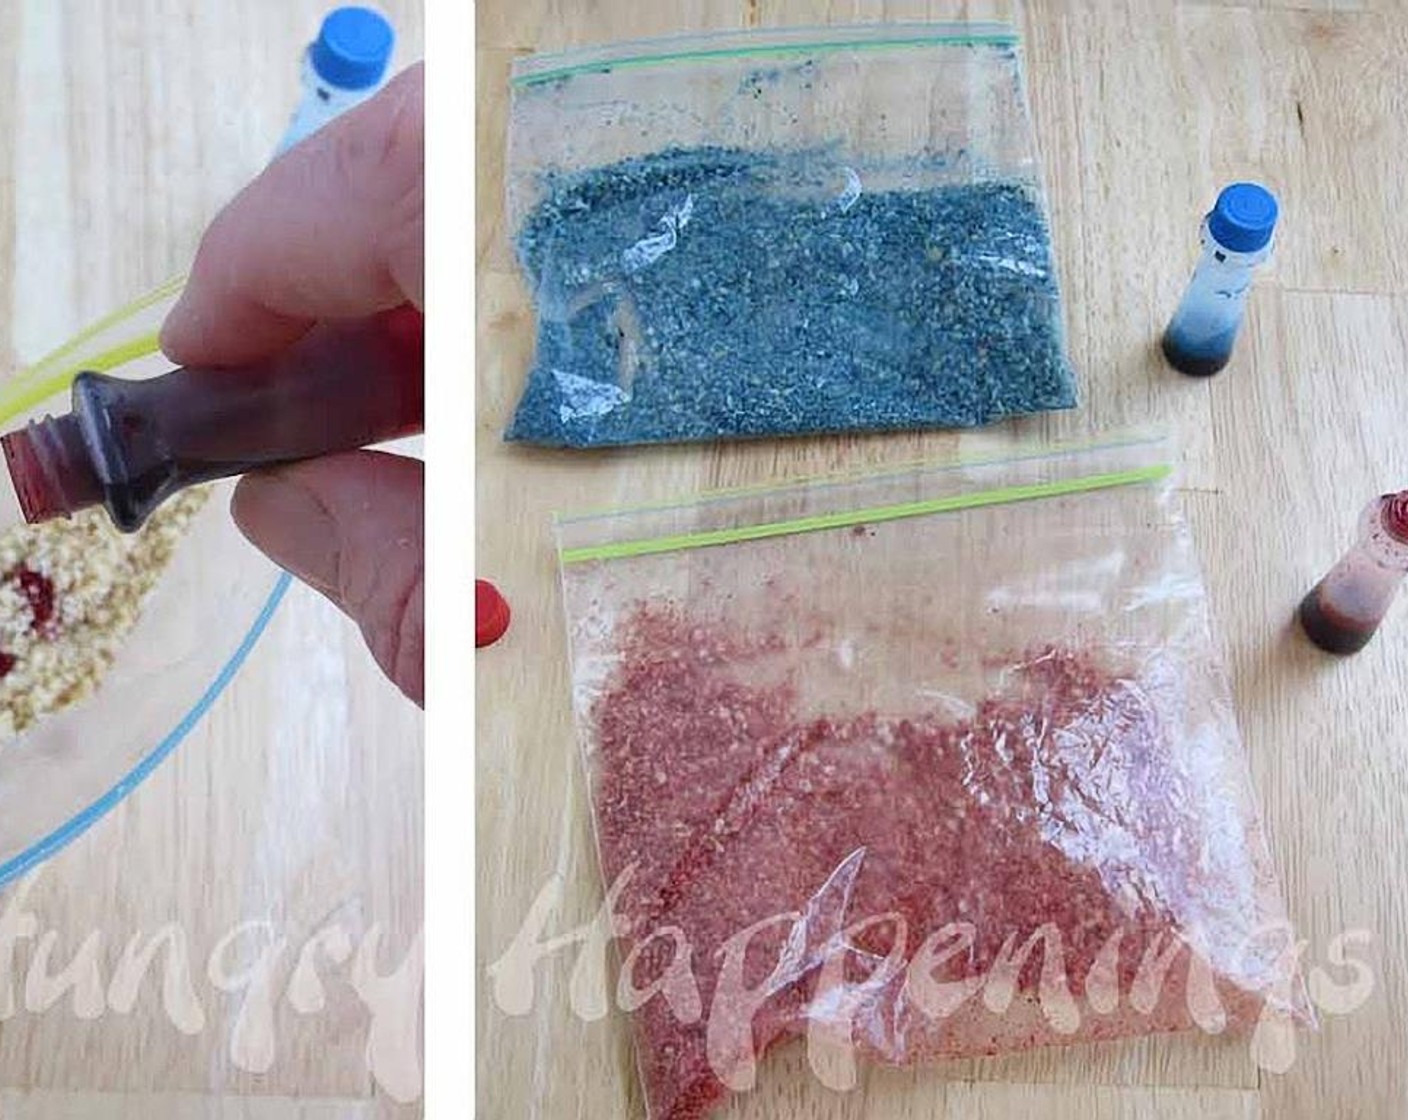 step 4 Divide crackers into two small zip top bags. Add drops of Red Food Coloring (to taste) into one bag and Blue Food Coloring (to taste) into the other. Shake to blend the color with the crumbs. Add more coloring if needed until you get the desired color.